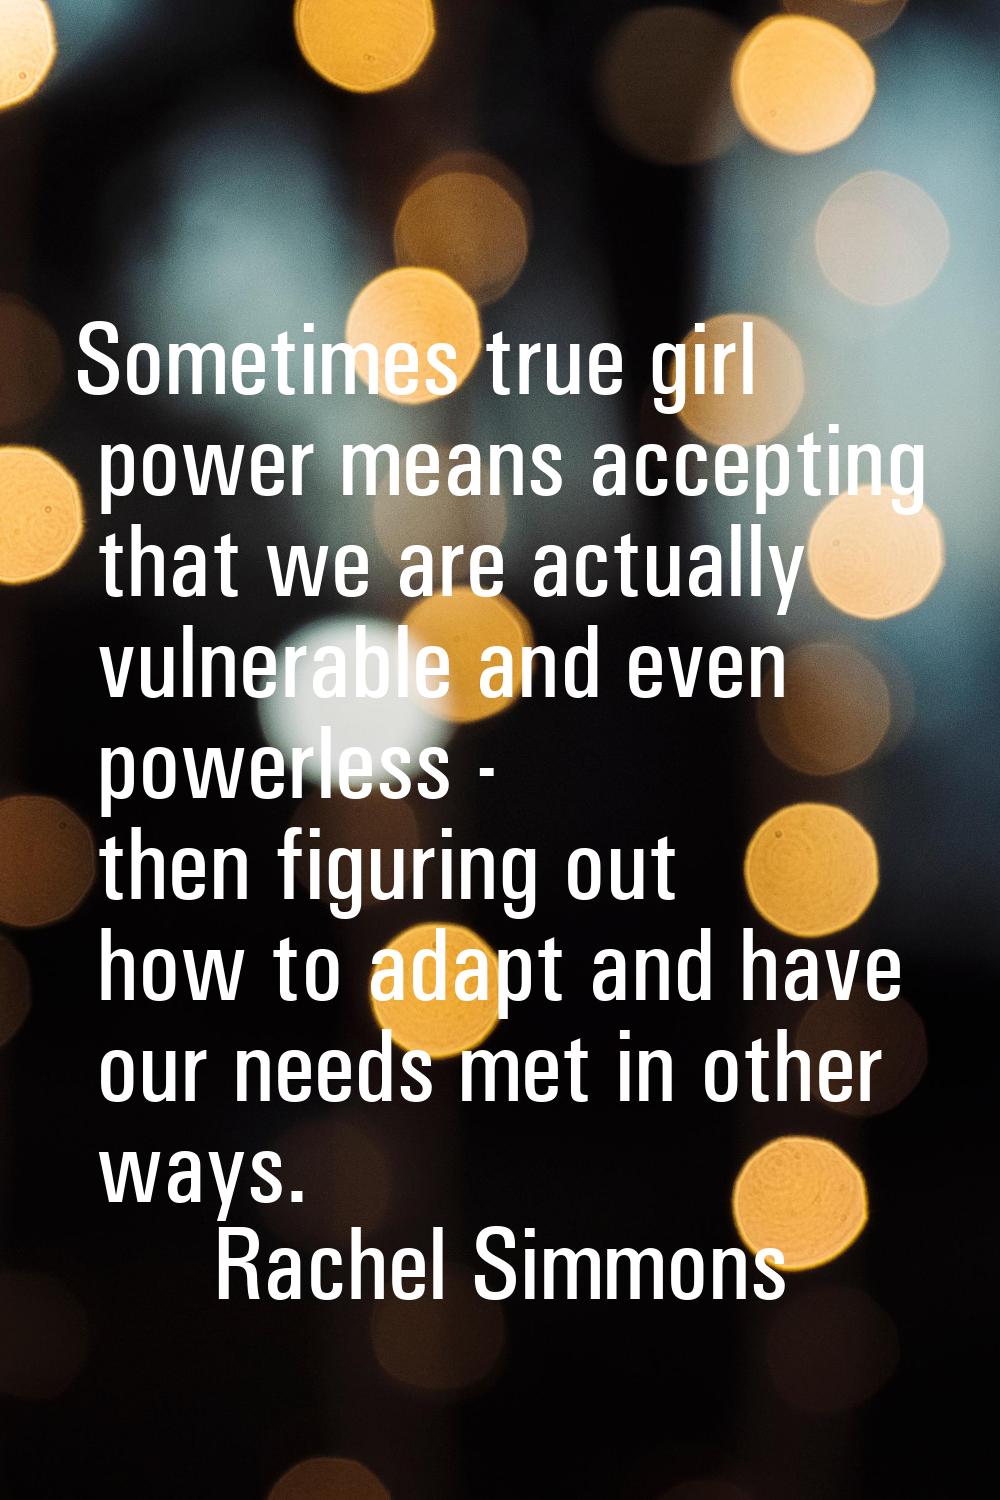 Sometimes true girl power means accepting that we are actually vulnerable and even powerless - then